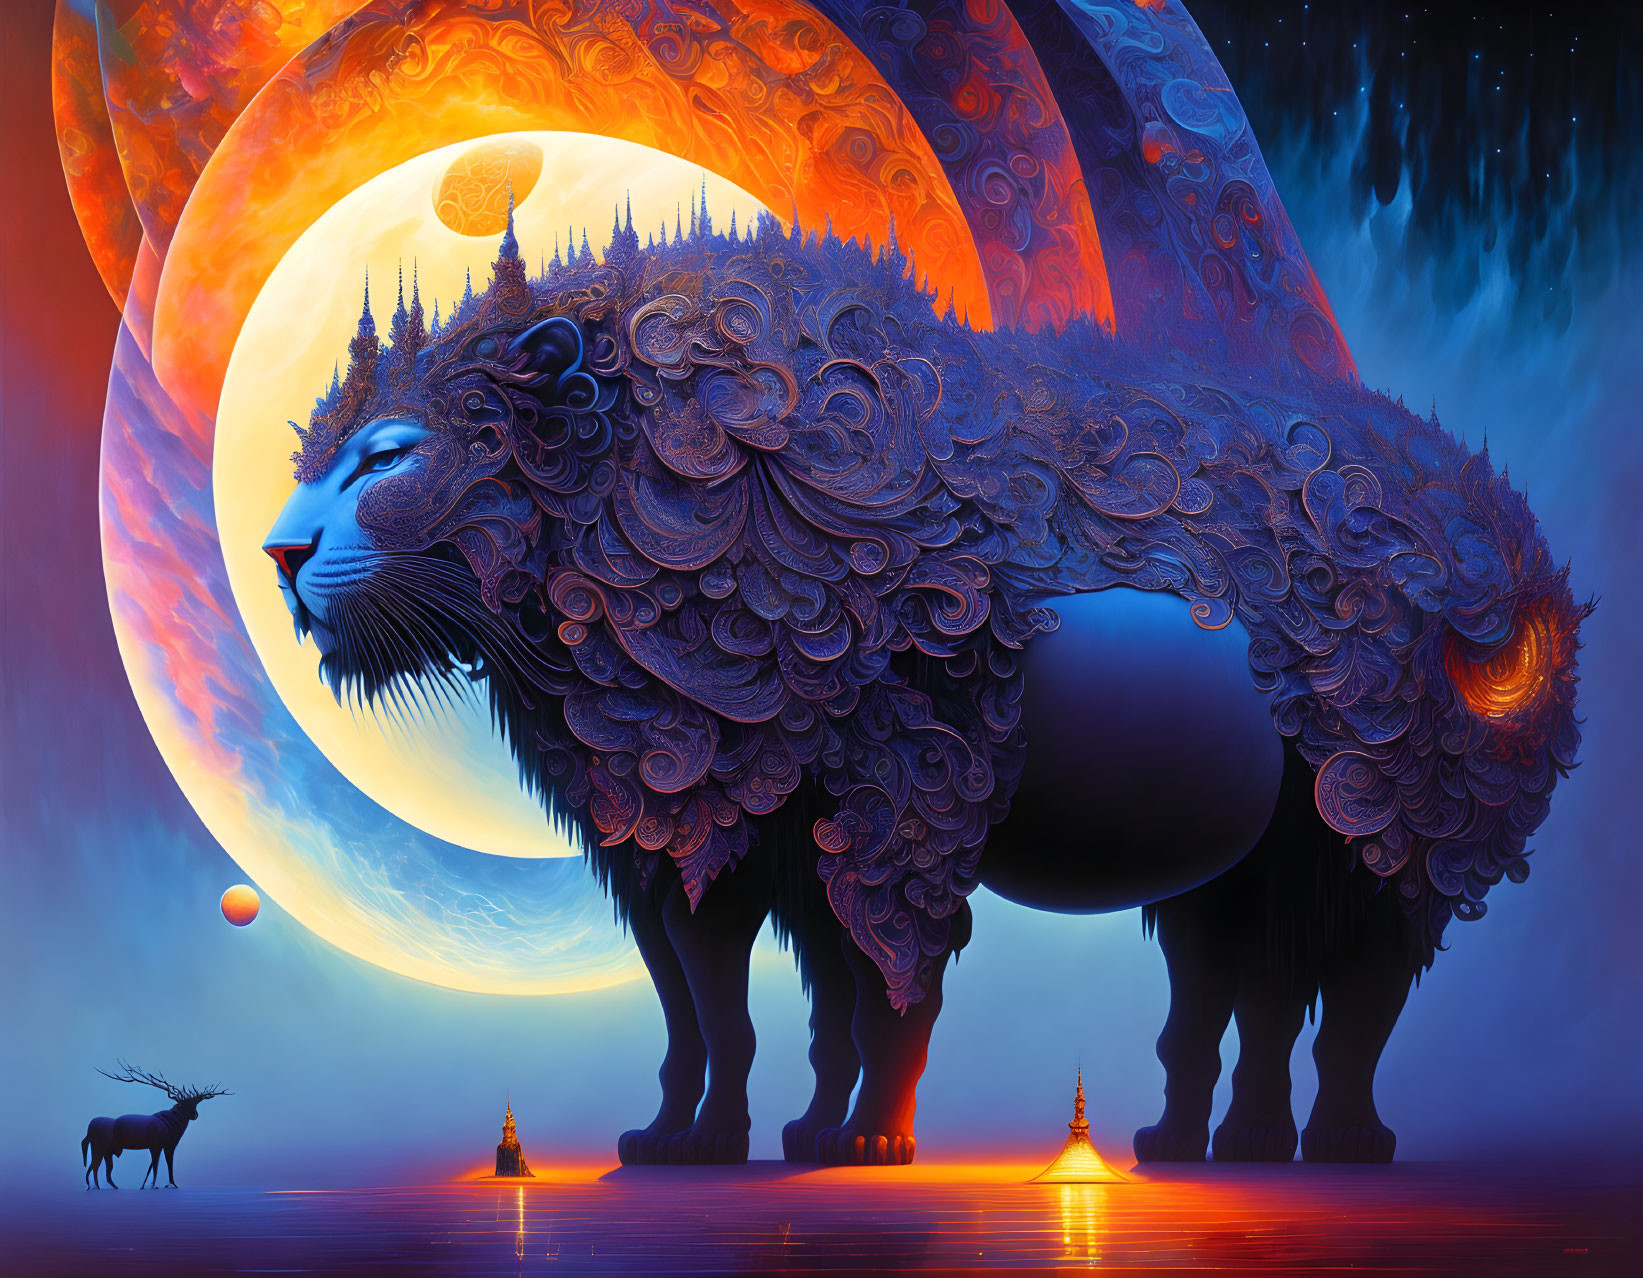 Majestic lion with intricate patterns amid vibrant planets, stag, and temples under cosmic sky